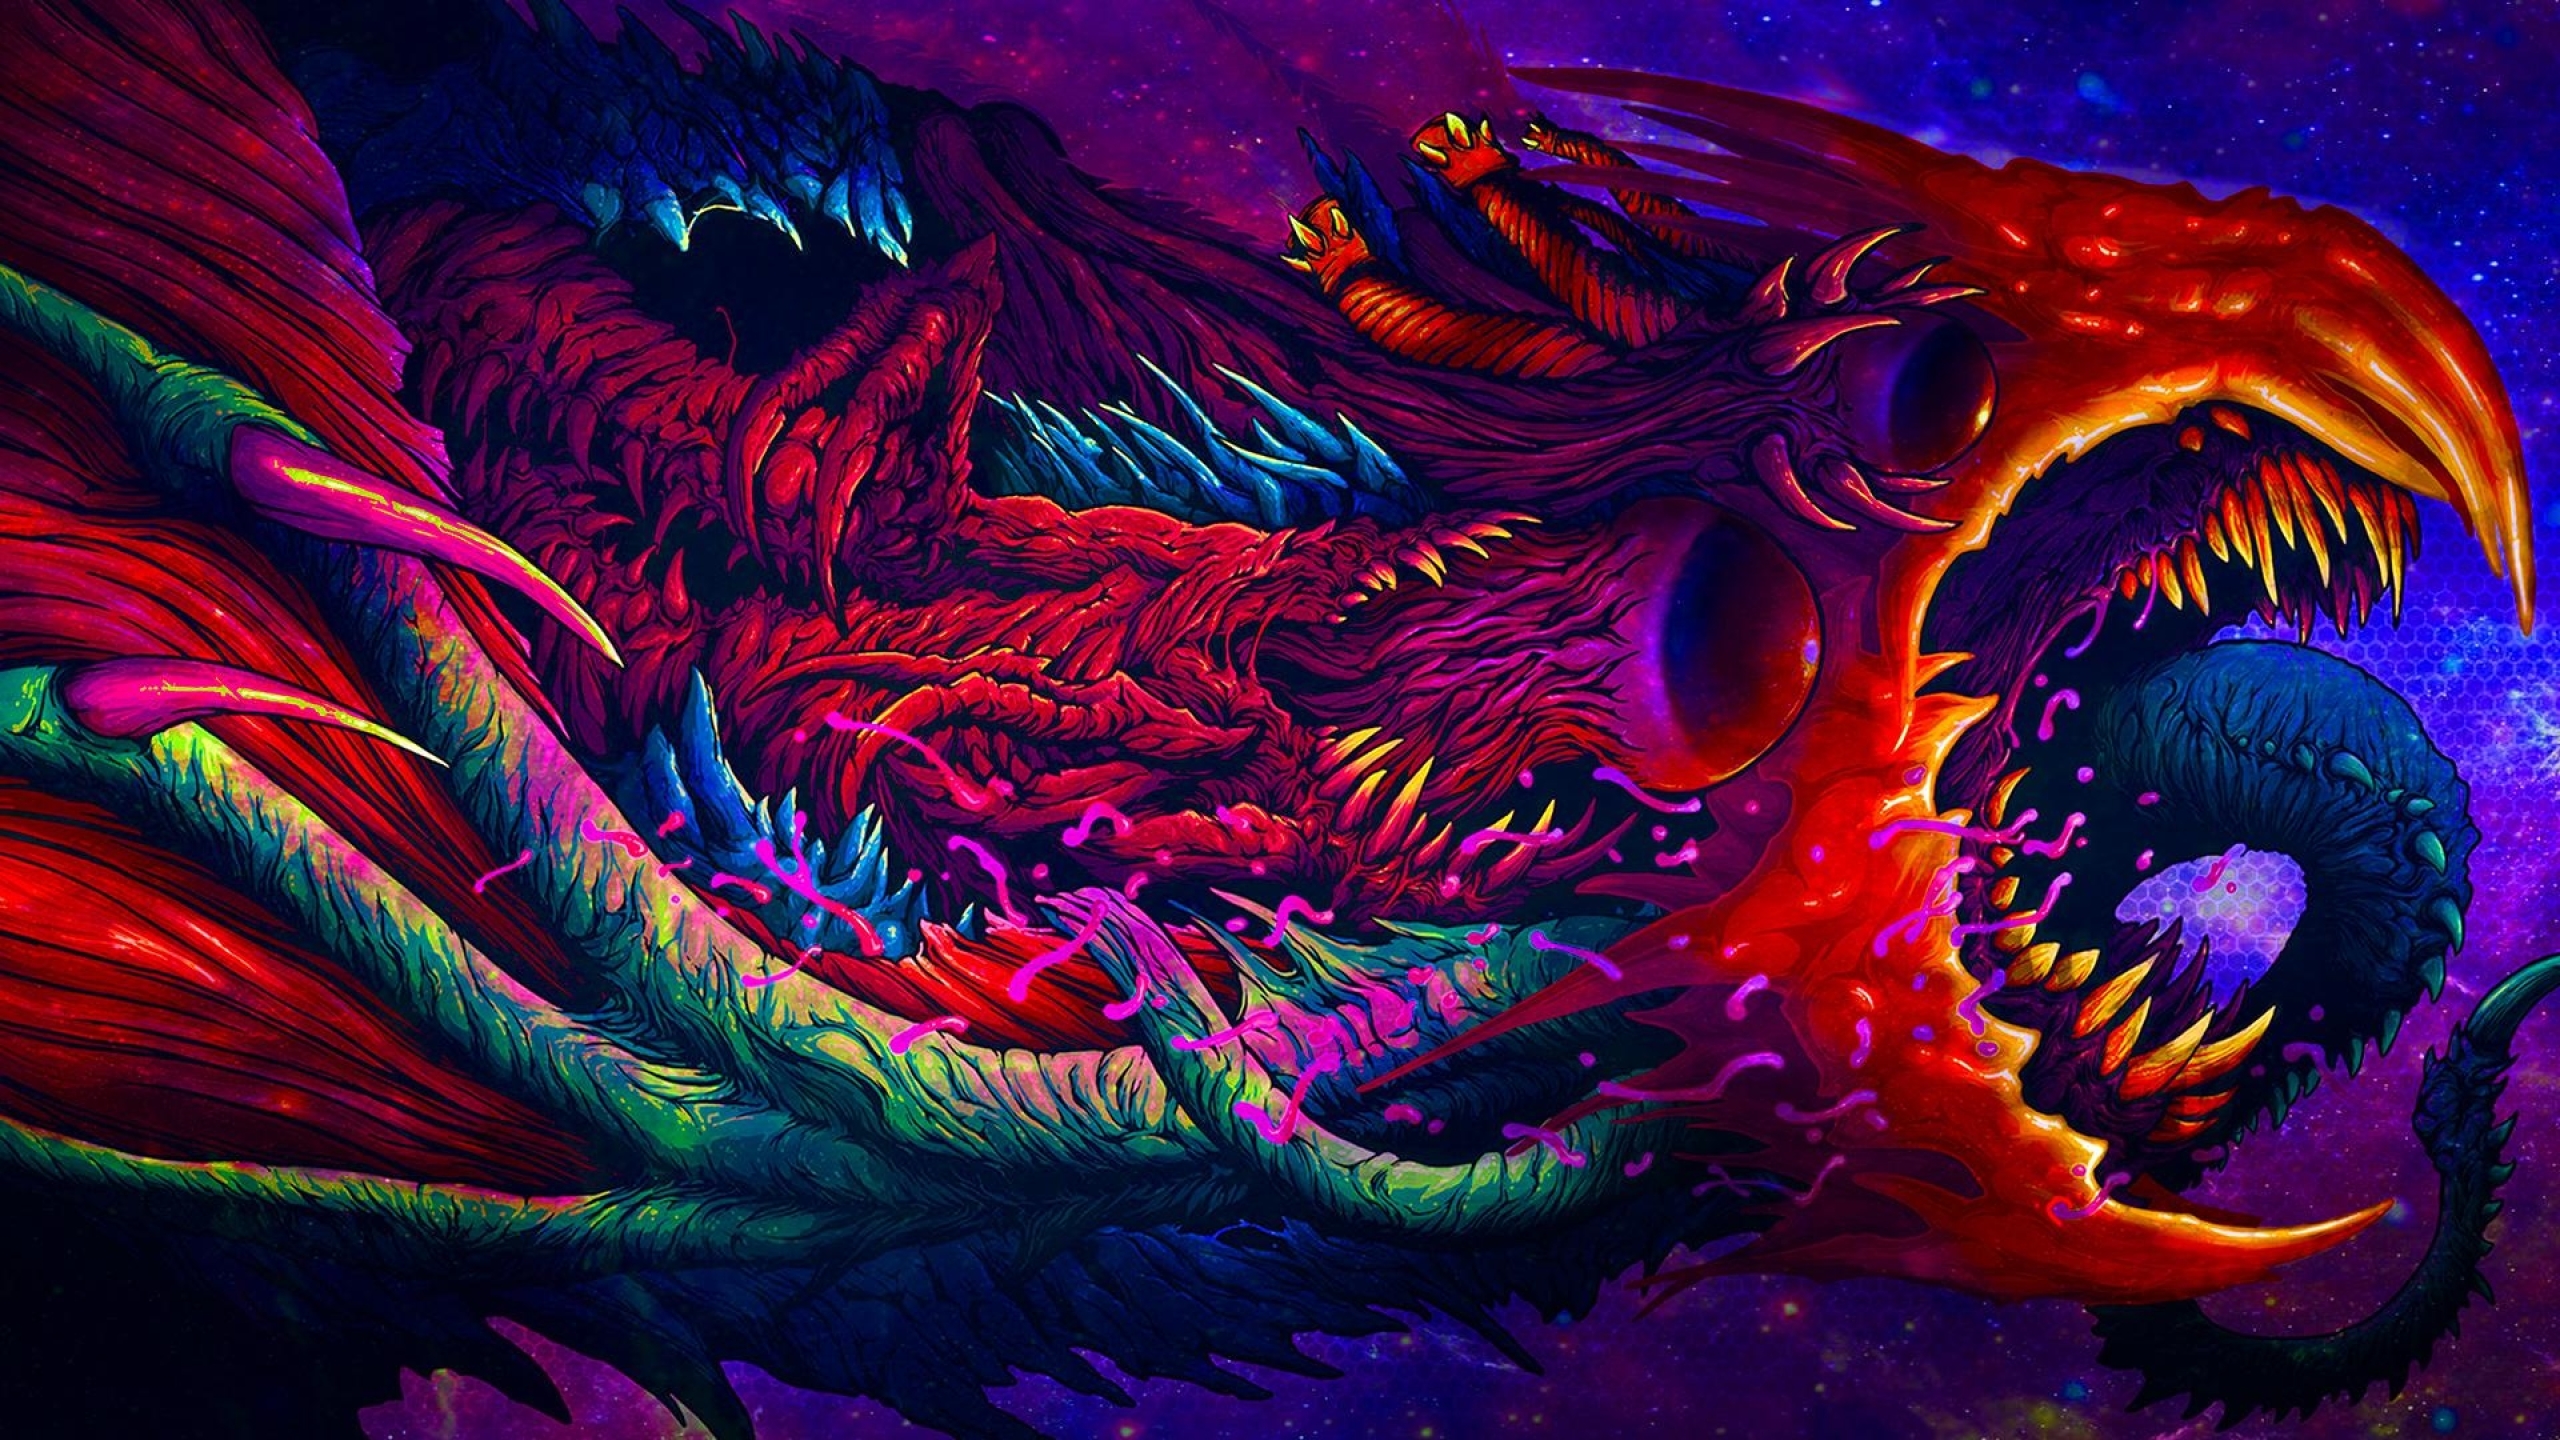 2560x1440 Hyper Beast Csgo Art Cool 1440p Resolution Wallpaper Hd Games 4k Wallpapers Images Photos And Background